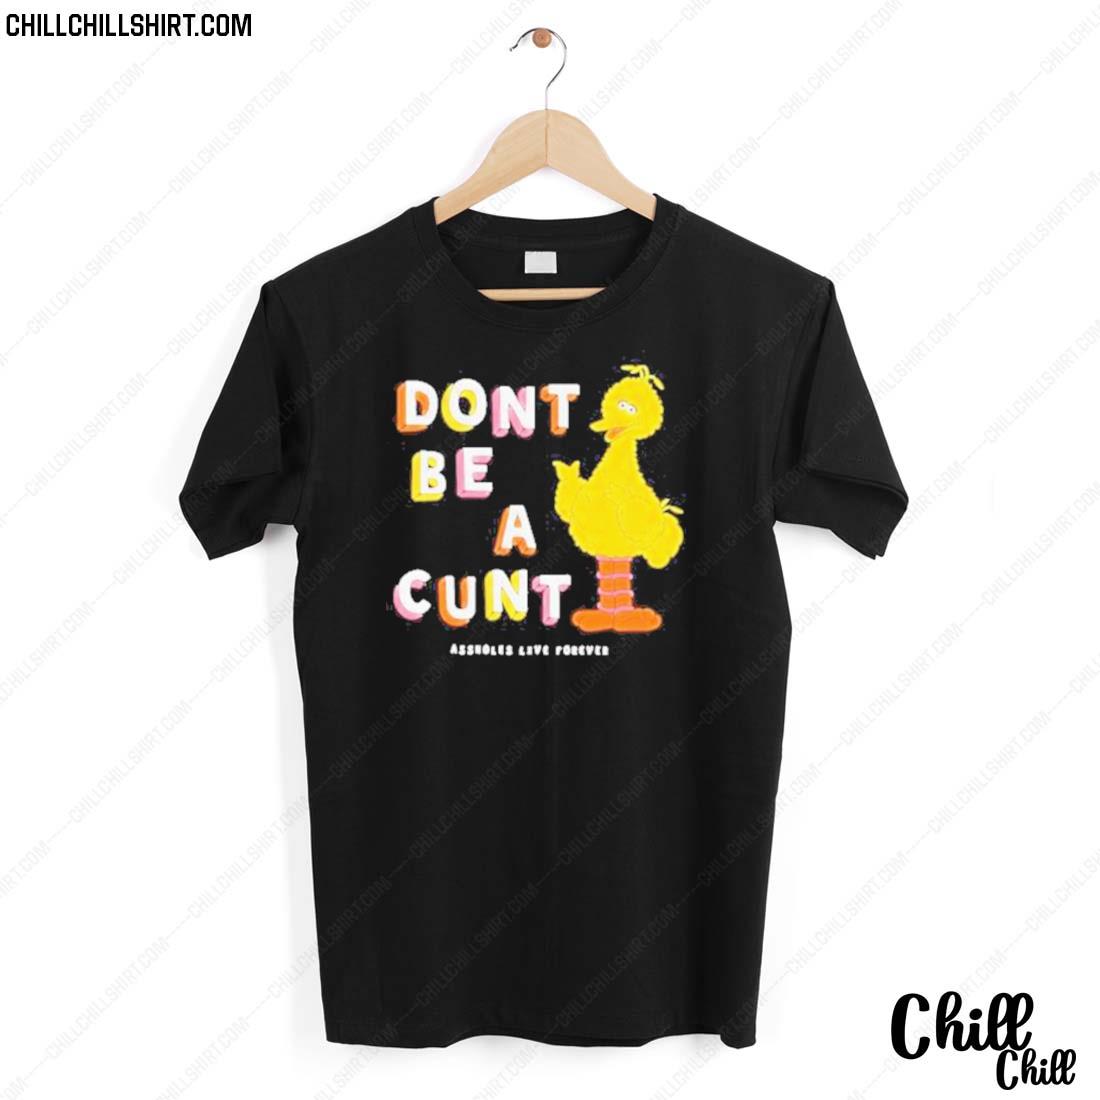 Official don’t Be A Cunt Assholes Live Forever T-shirt